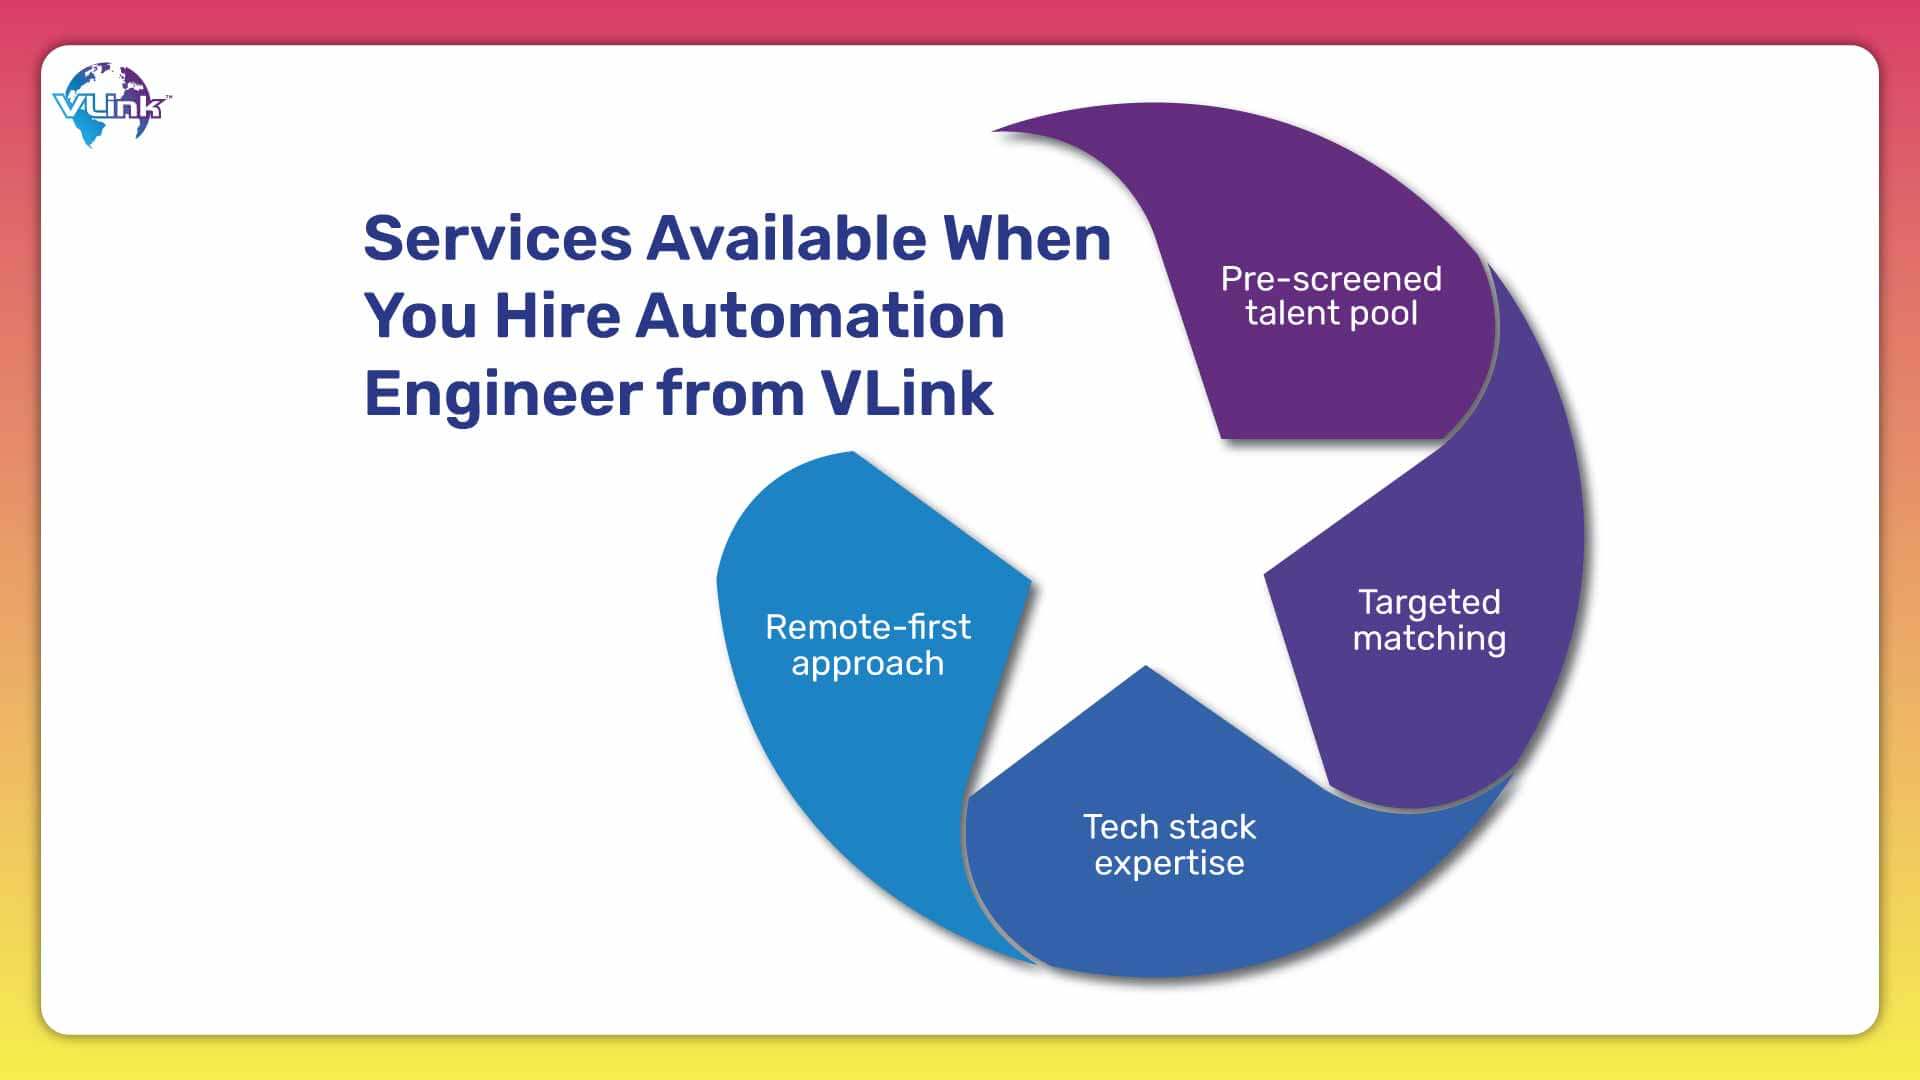 Services Available When You Hire Automation Engineer from VLink